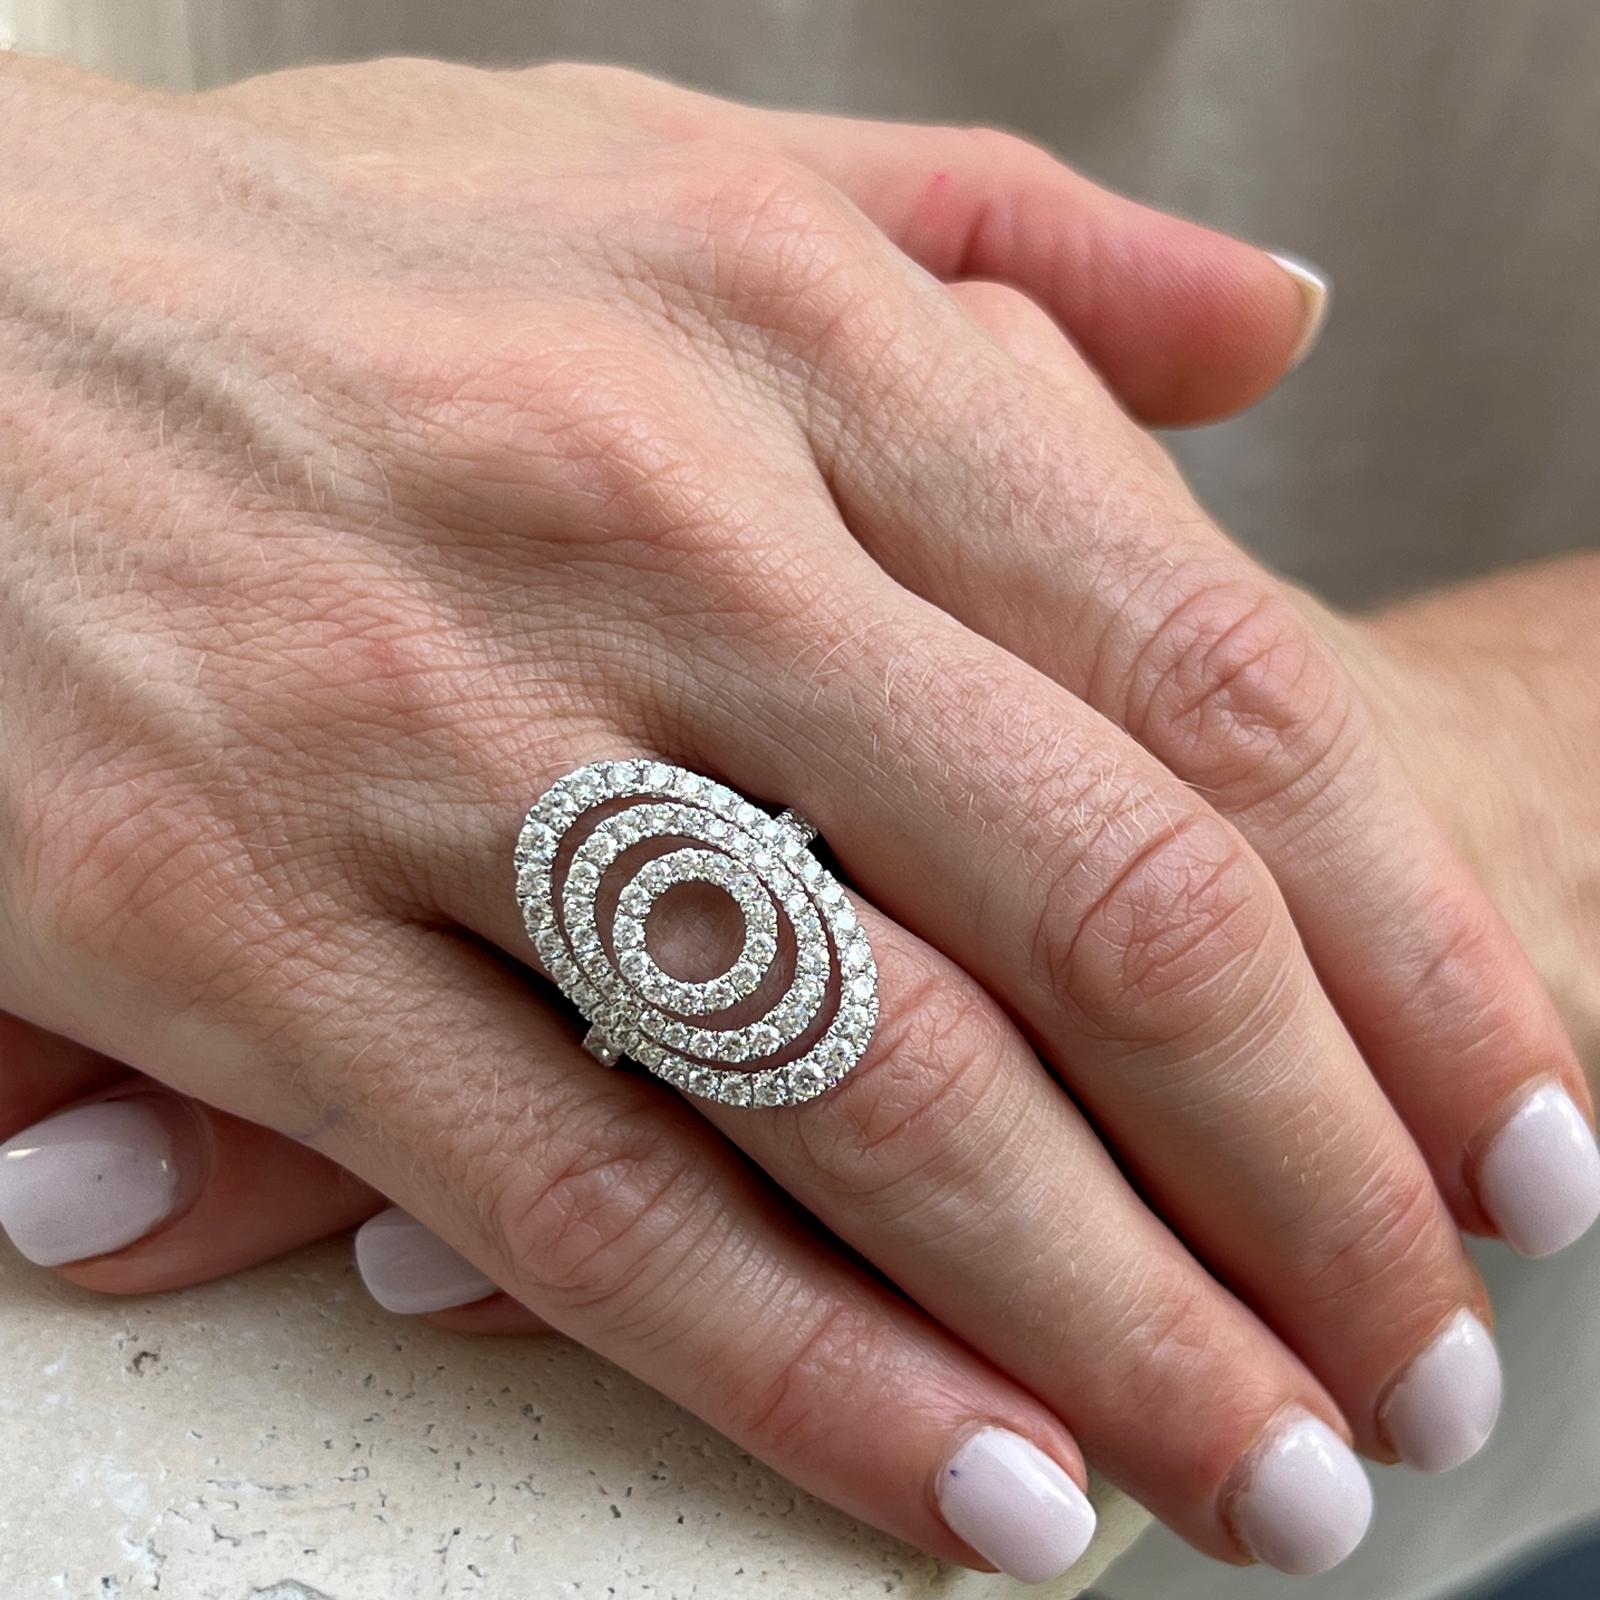 Modern diamond cocktail ring crafted in 18 karat white gold. The open circle ring features round brilliant cut diamonds weighing 2.00 carat total weight and graded G-H color and SI clarity. The ring is currently size 7 (can be sized), and measures